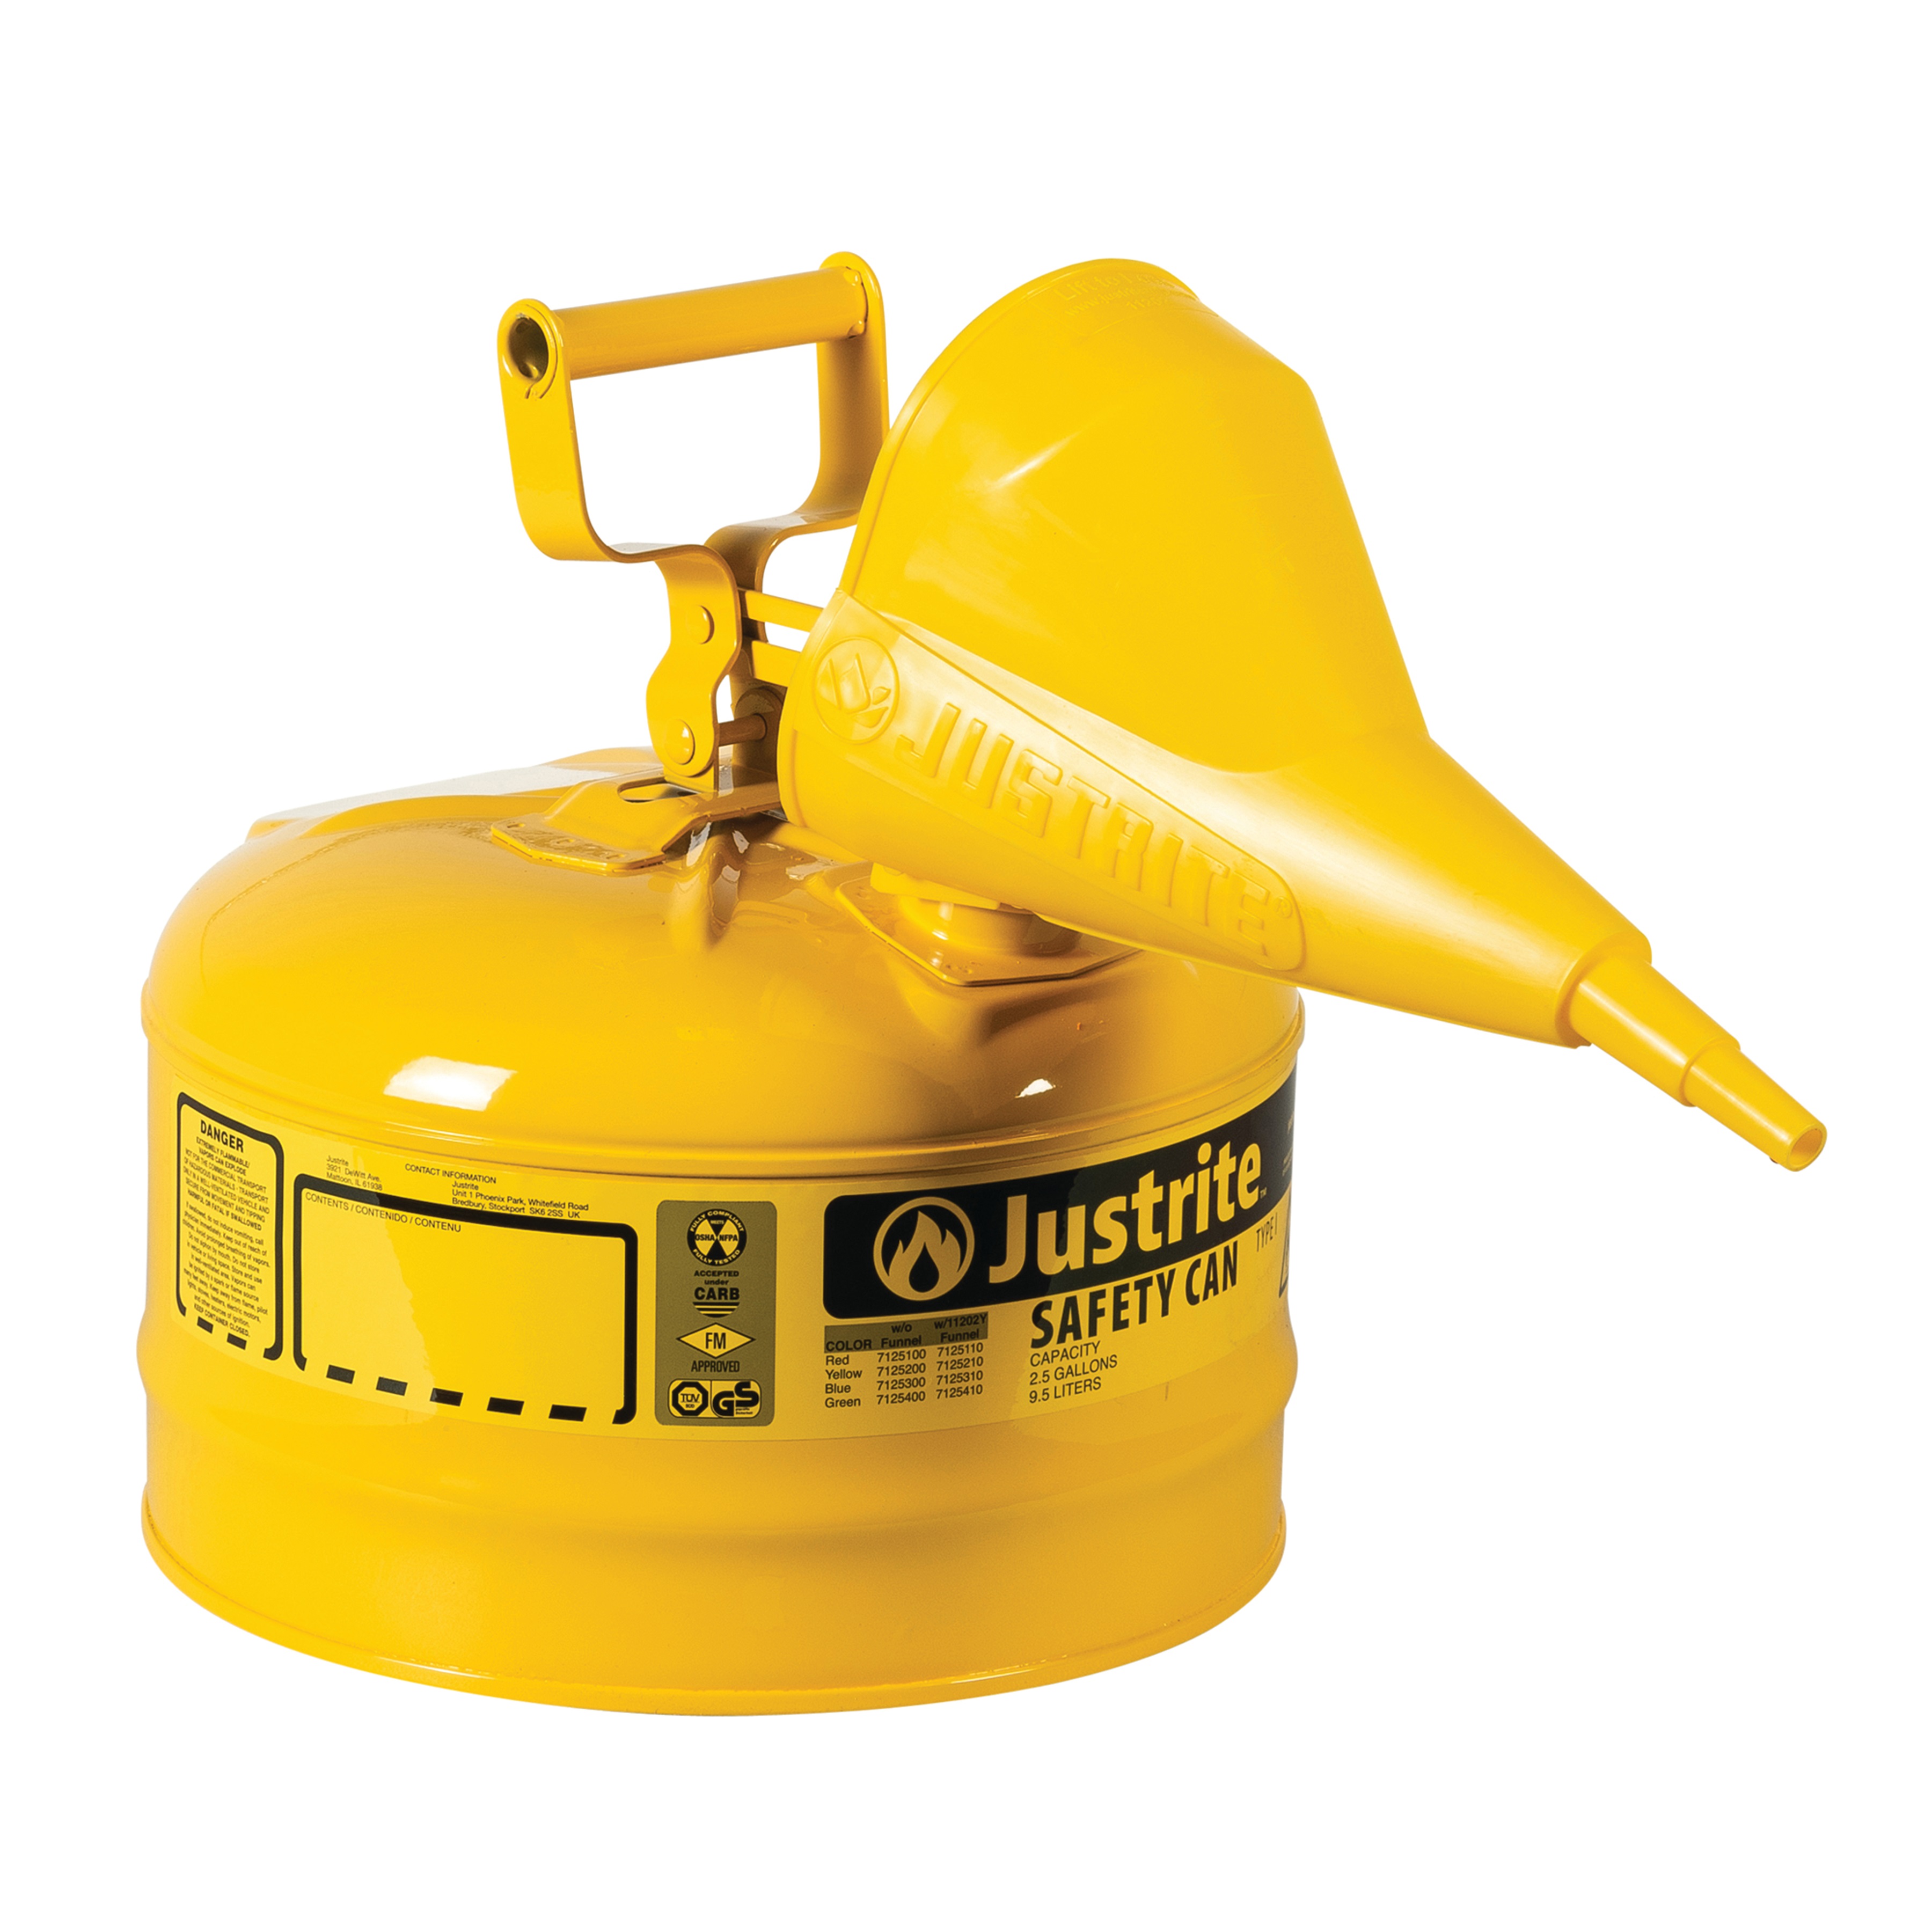 Justrite Swinging Handle Type 1 Safety Cans with Funnel Yellow - Spill Containment